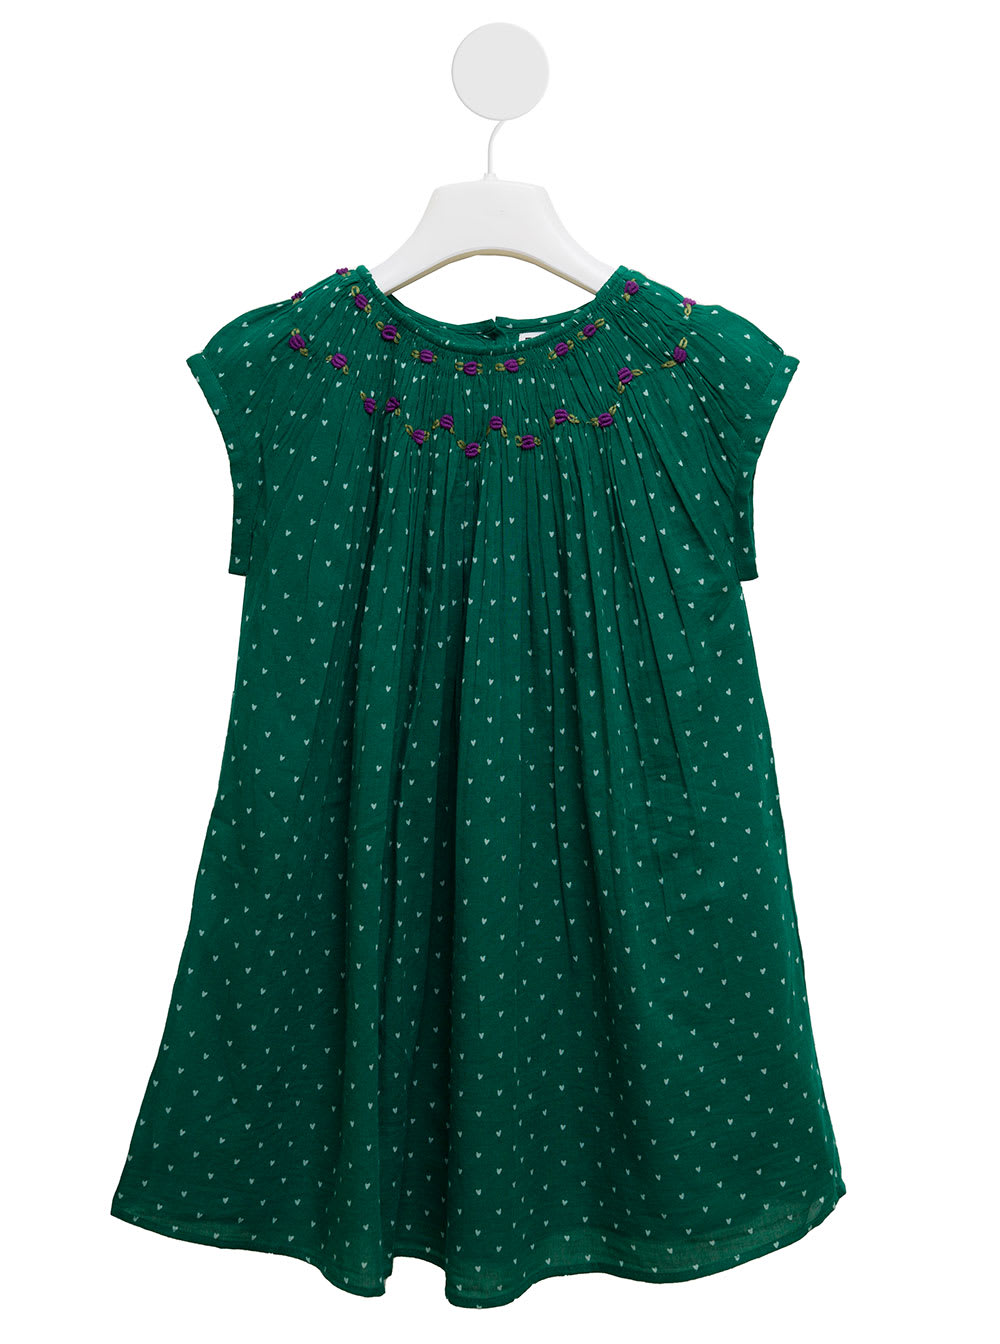 Emile Et Ida Kids Girls Green Cotton Dress With Hearts Print And Embroidered Floral Inserts